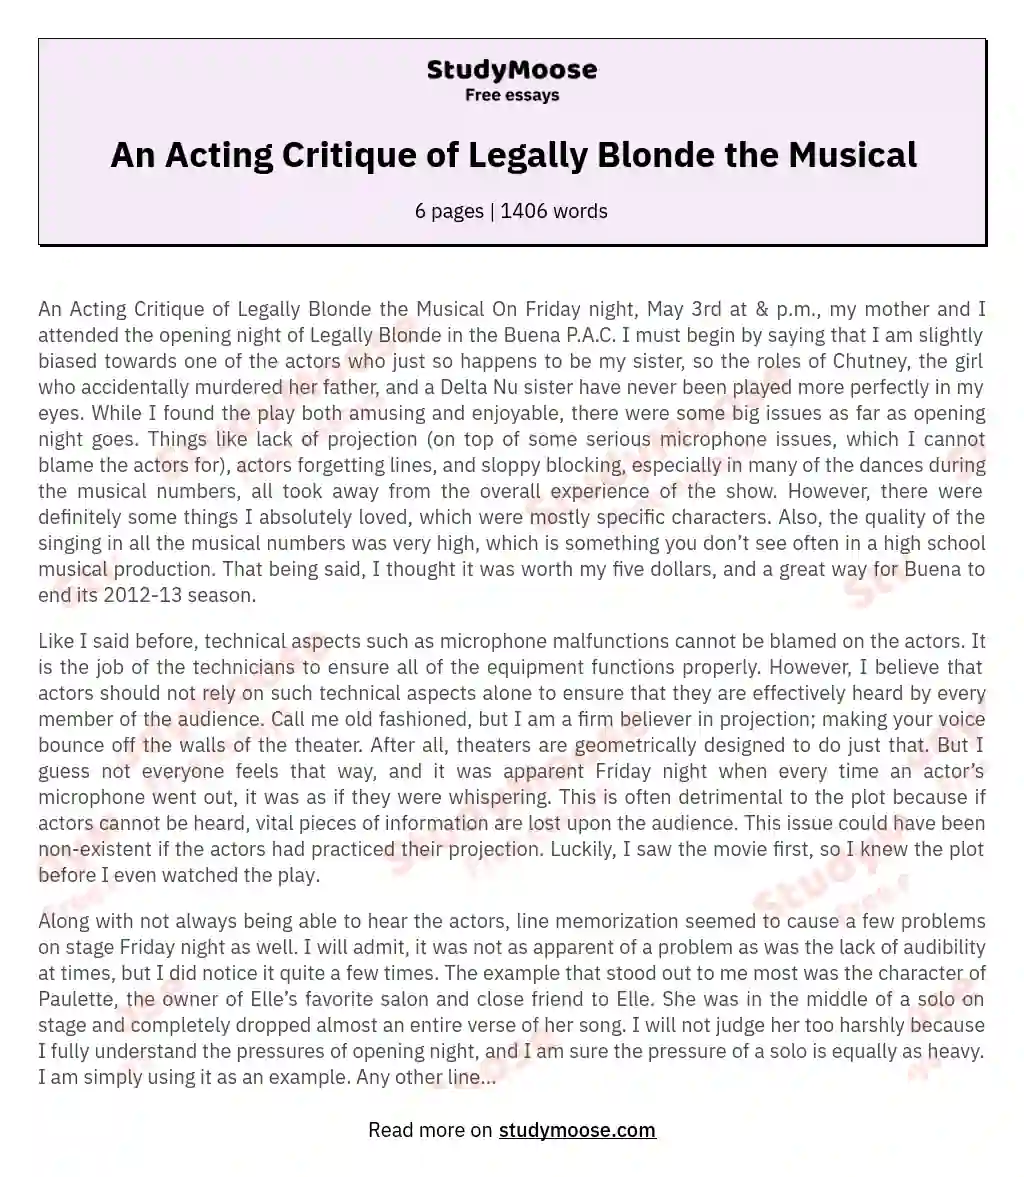 The Theatrical Critique of Legally Blonde the Musical essay